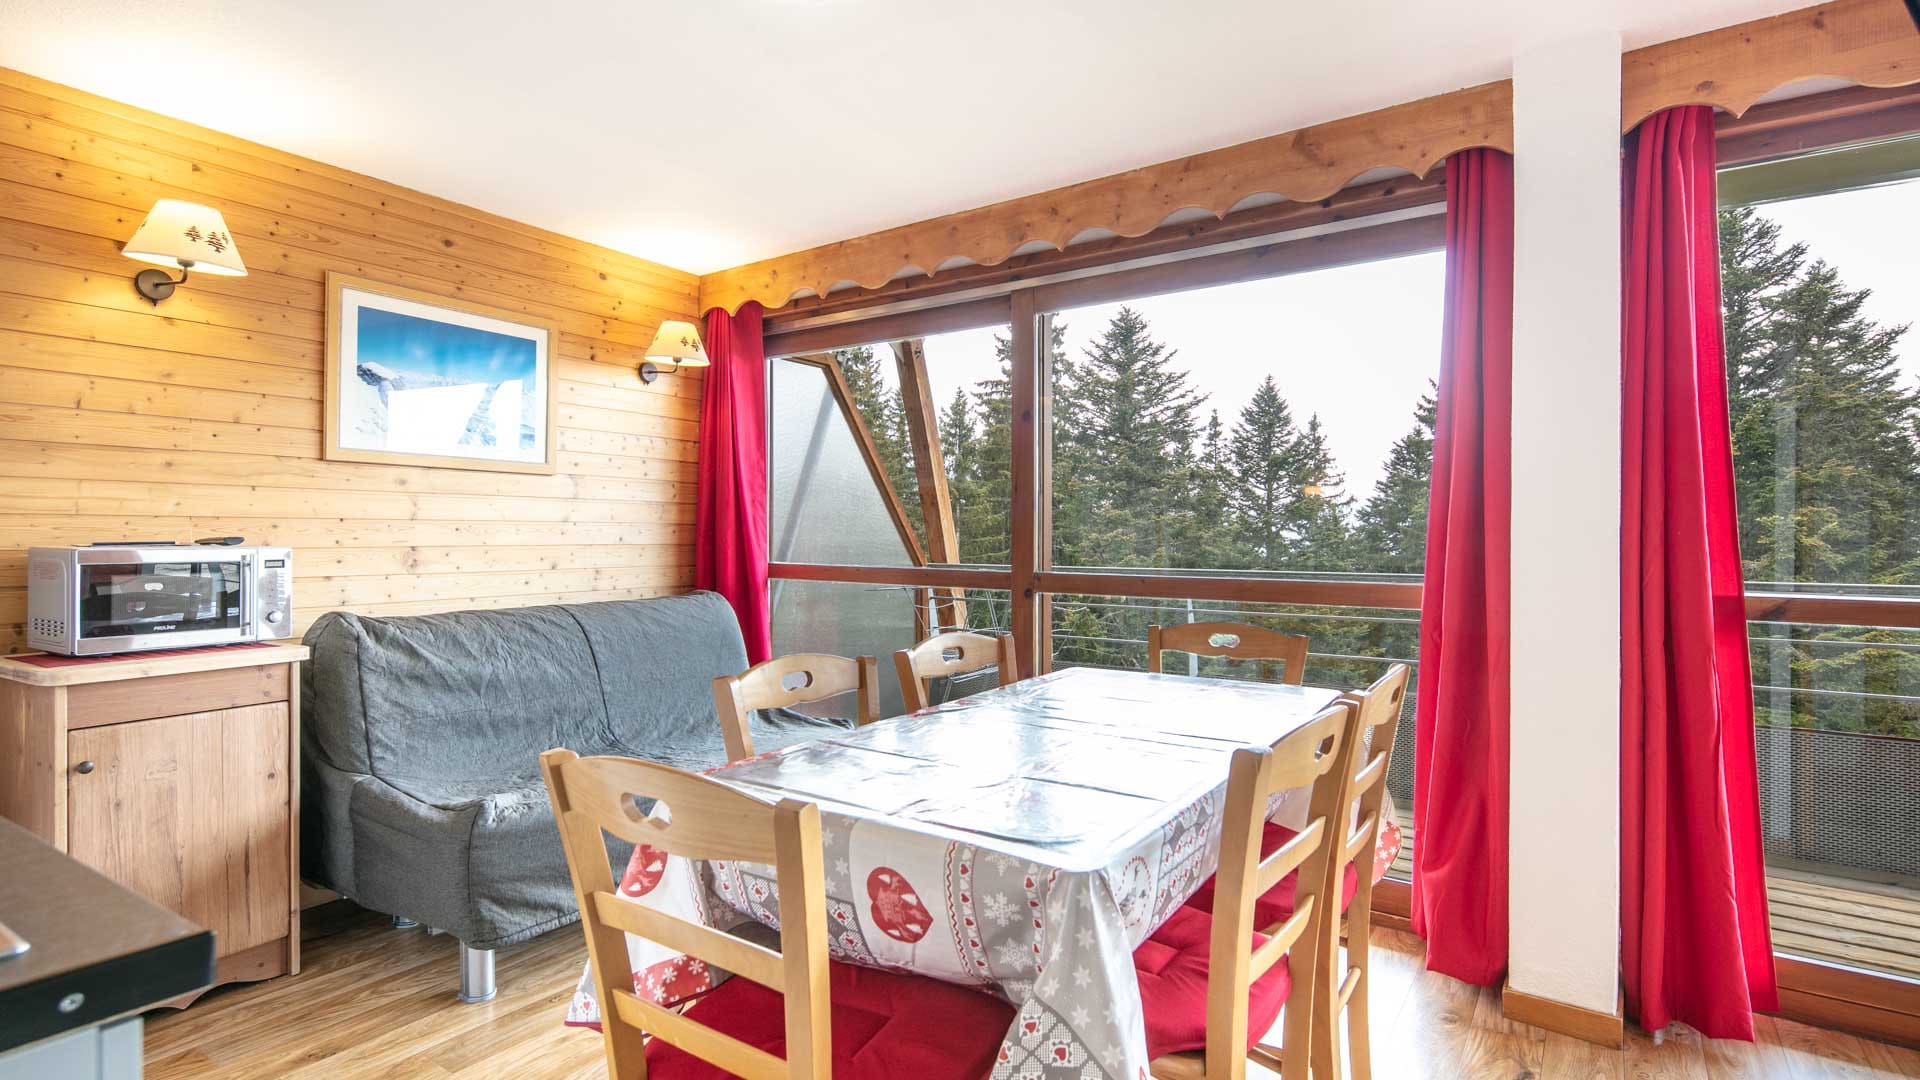 2 rooms 6 persons mountain view - Apartements V du Bachat Asters B21 - Appt 4/6 pers - Chamrousse